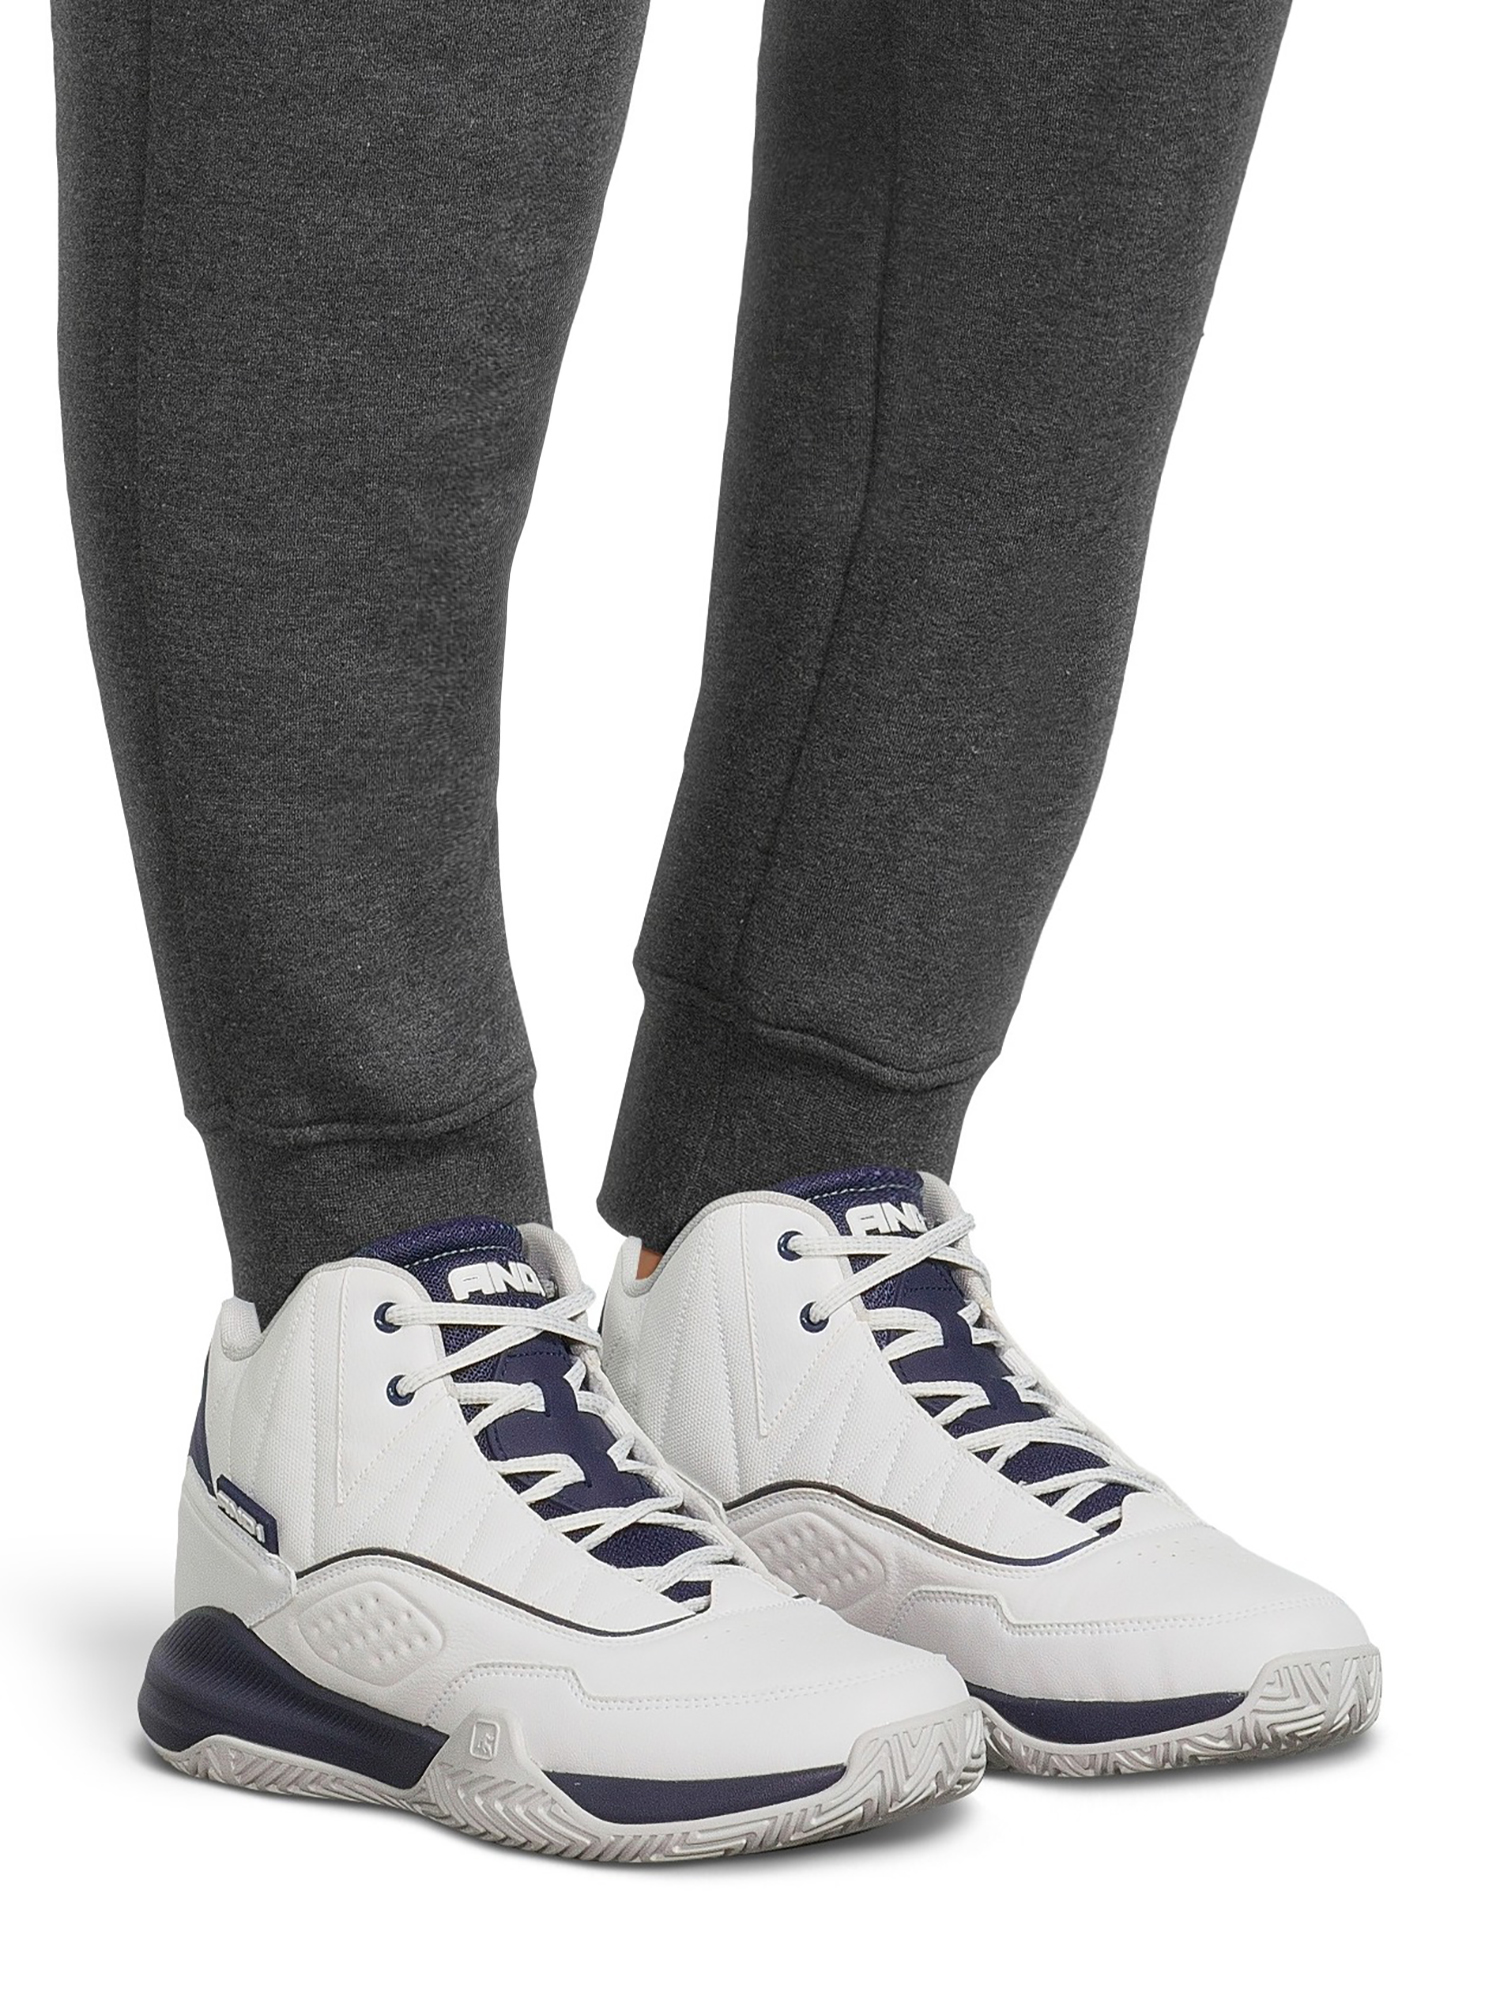 AND1 Men’s Streetball Basketball High-Top Sneakers - image 2 of 6